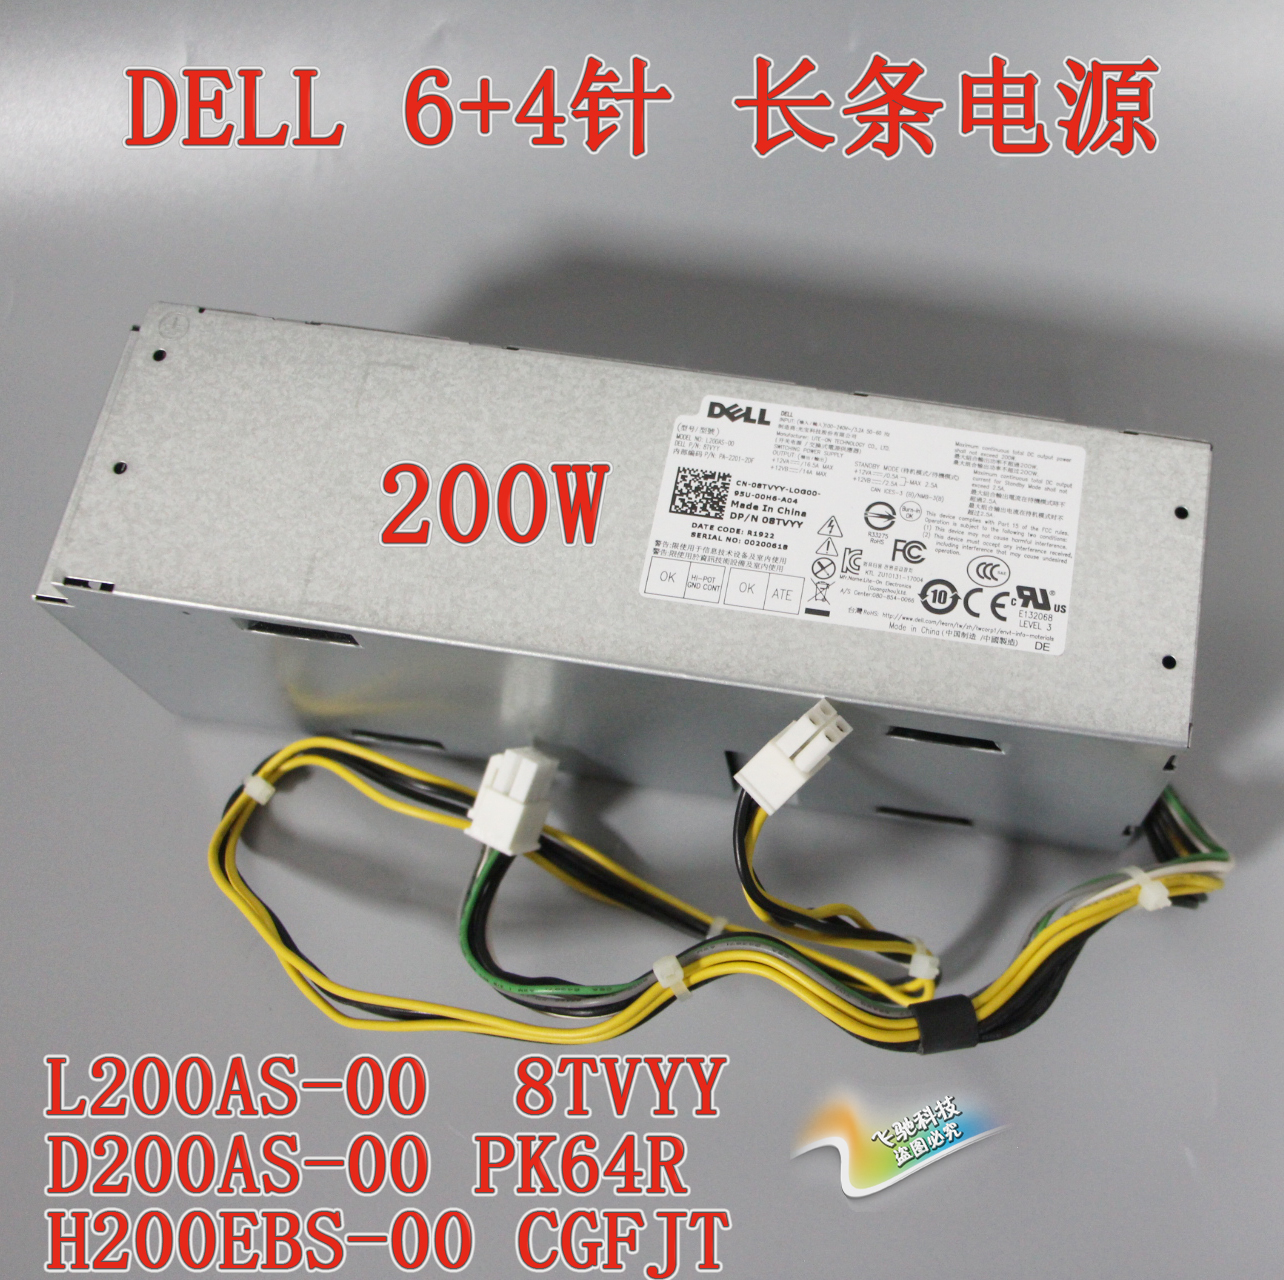 DELL L200AS-00 8TVYY D200AS-00 PK64R H200EBS-00 CGFJT   ġ-